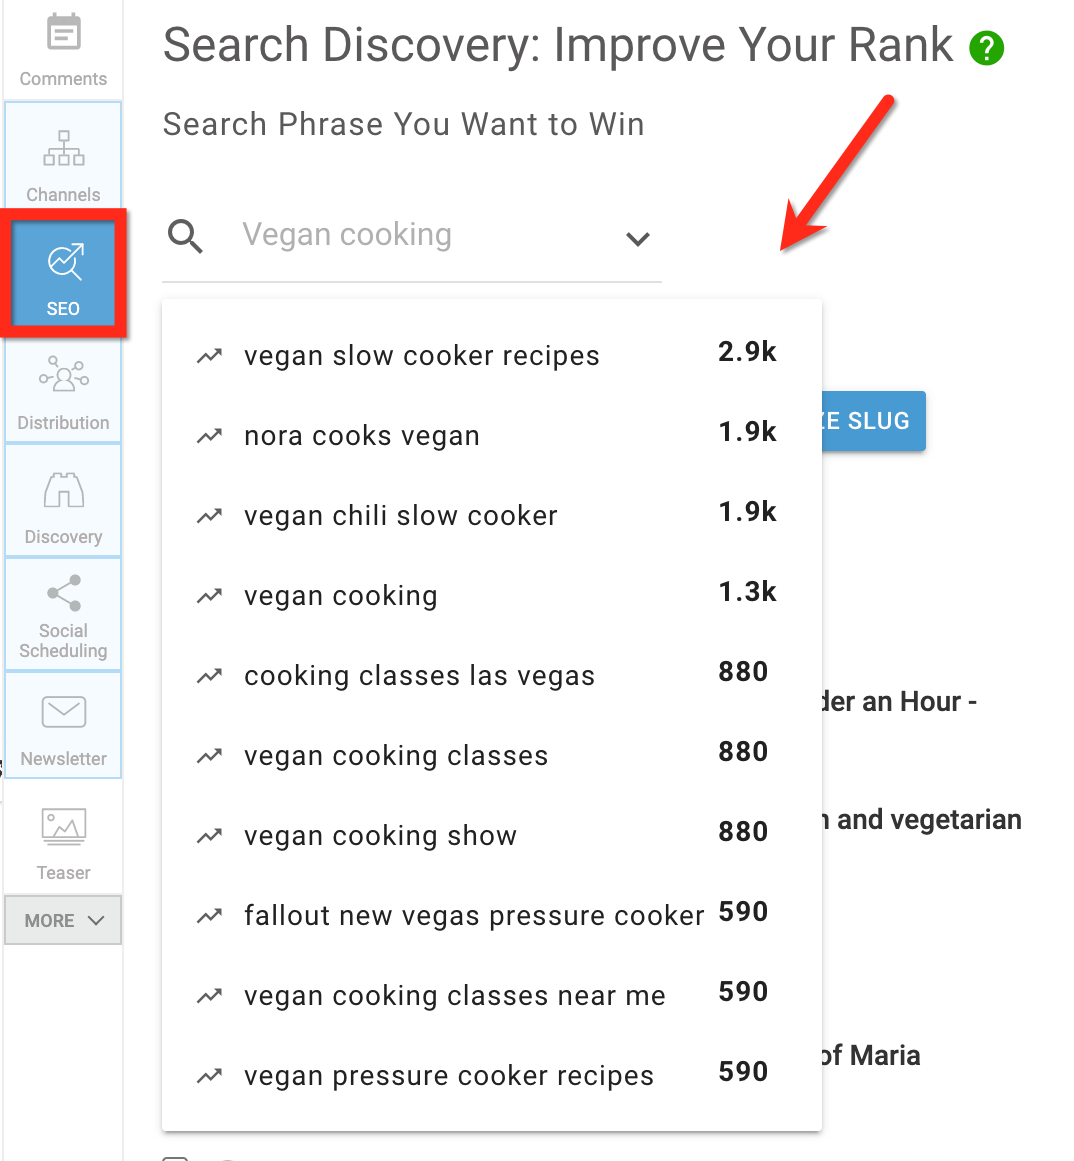 RebelMouse provides real-time search volume data from its Entry Editor